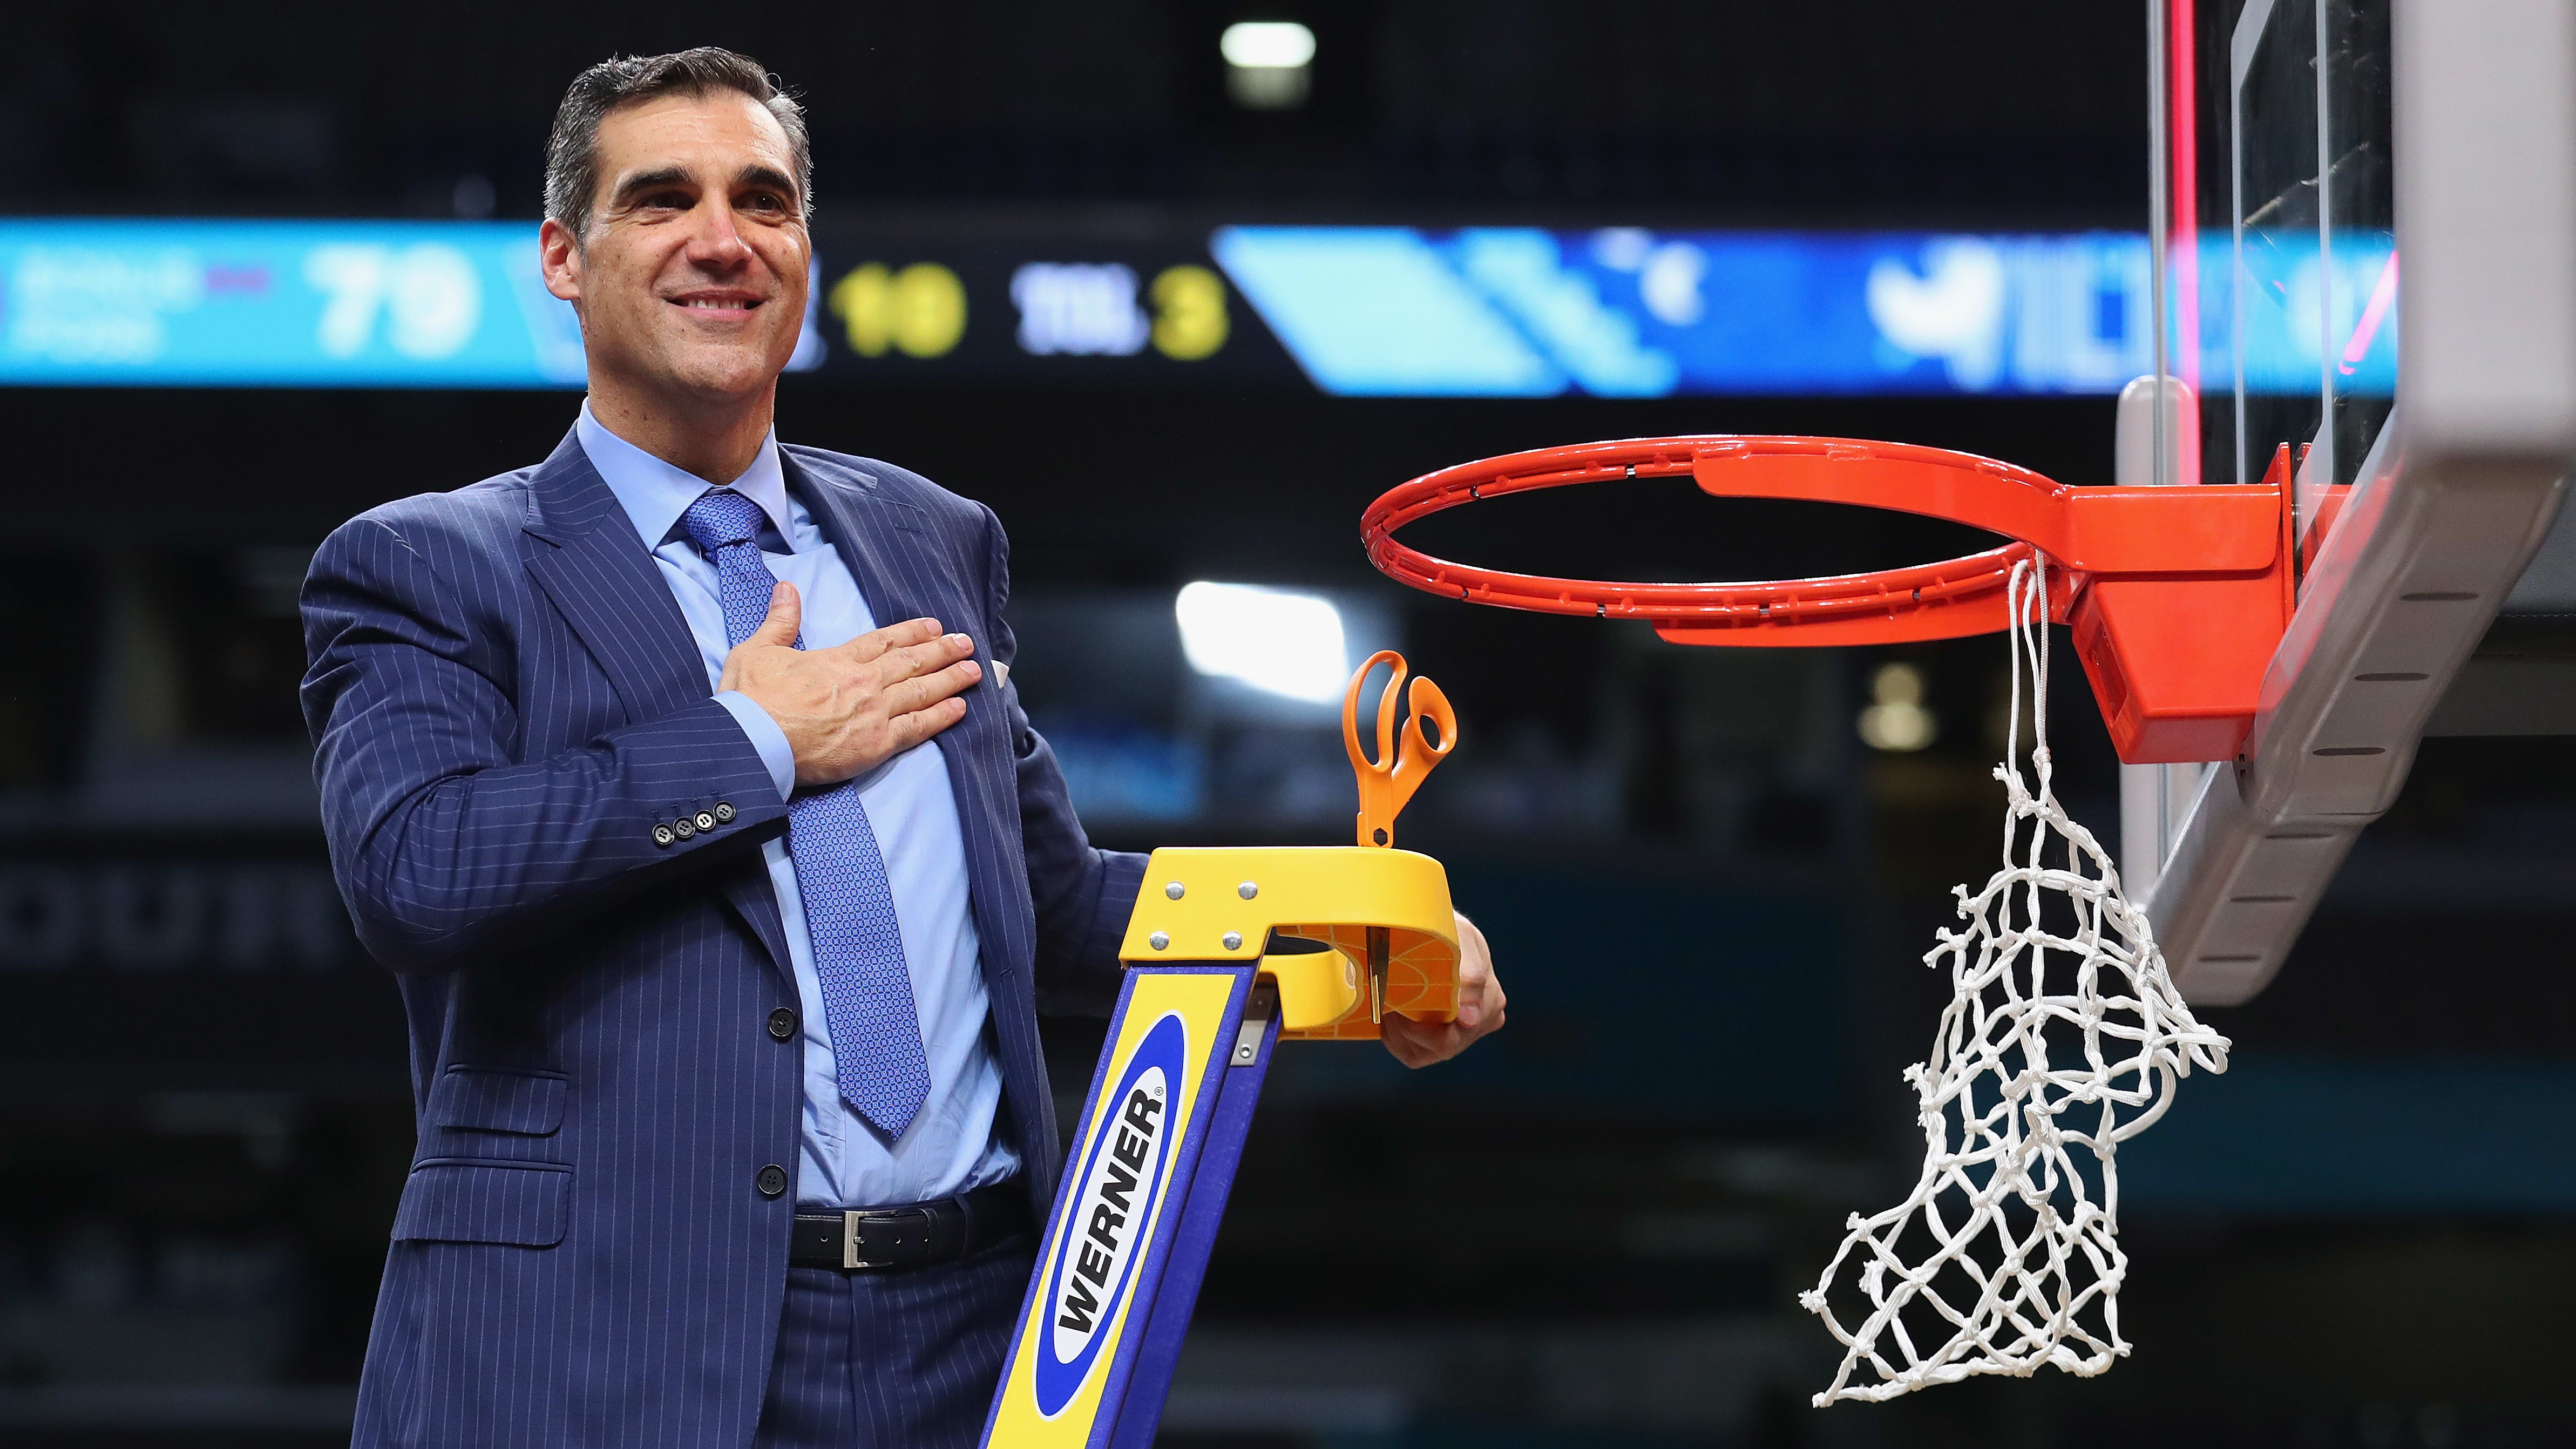 Army vs Villanova Odds, Point Spread, Betting Lines, Date & Start Time for College Basketball Game